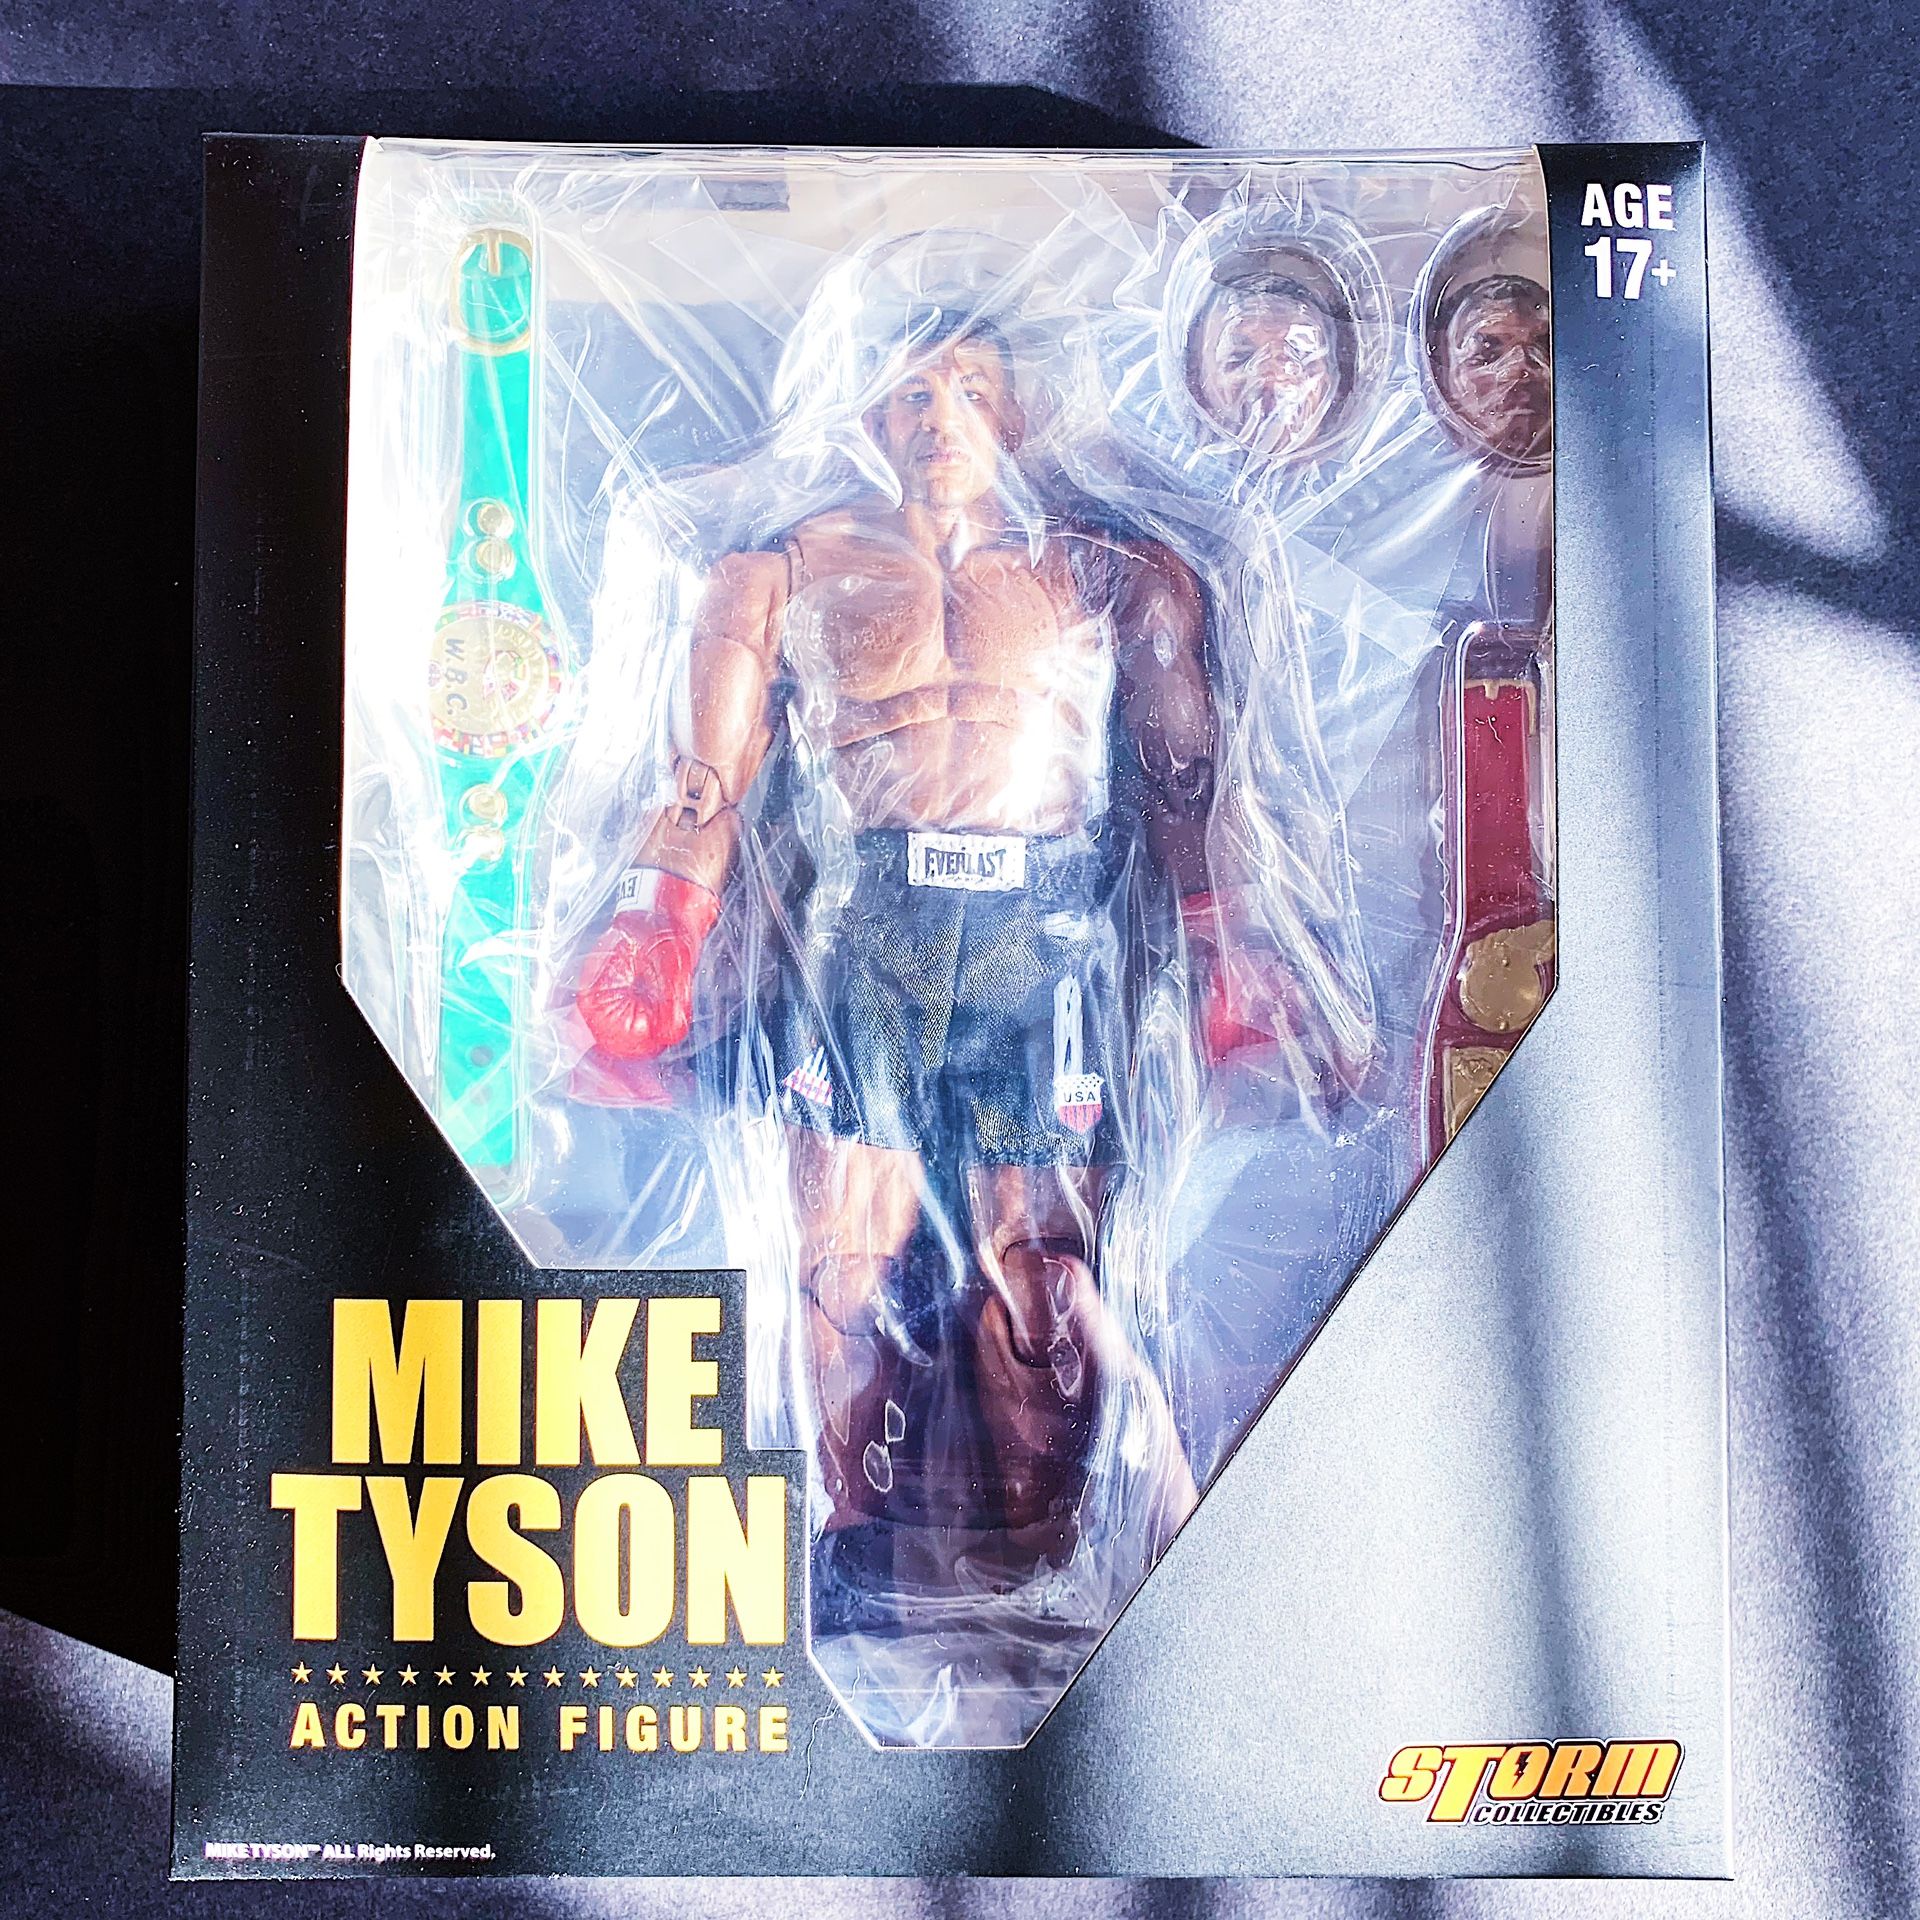 MIKE TYSON STORM COLLECTIBLES IRON MIKE 1:12